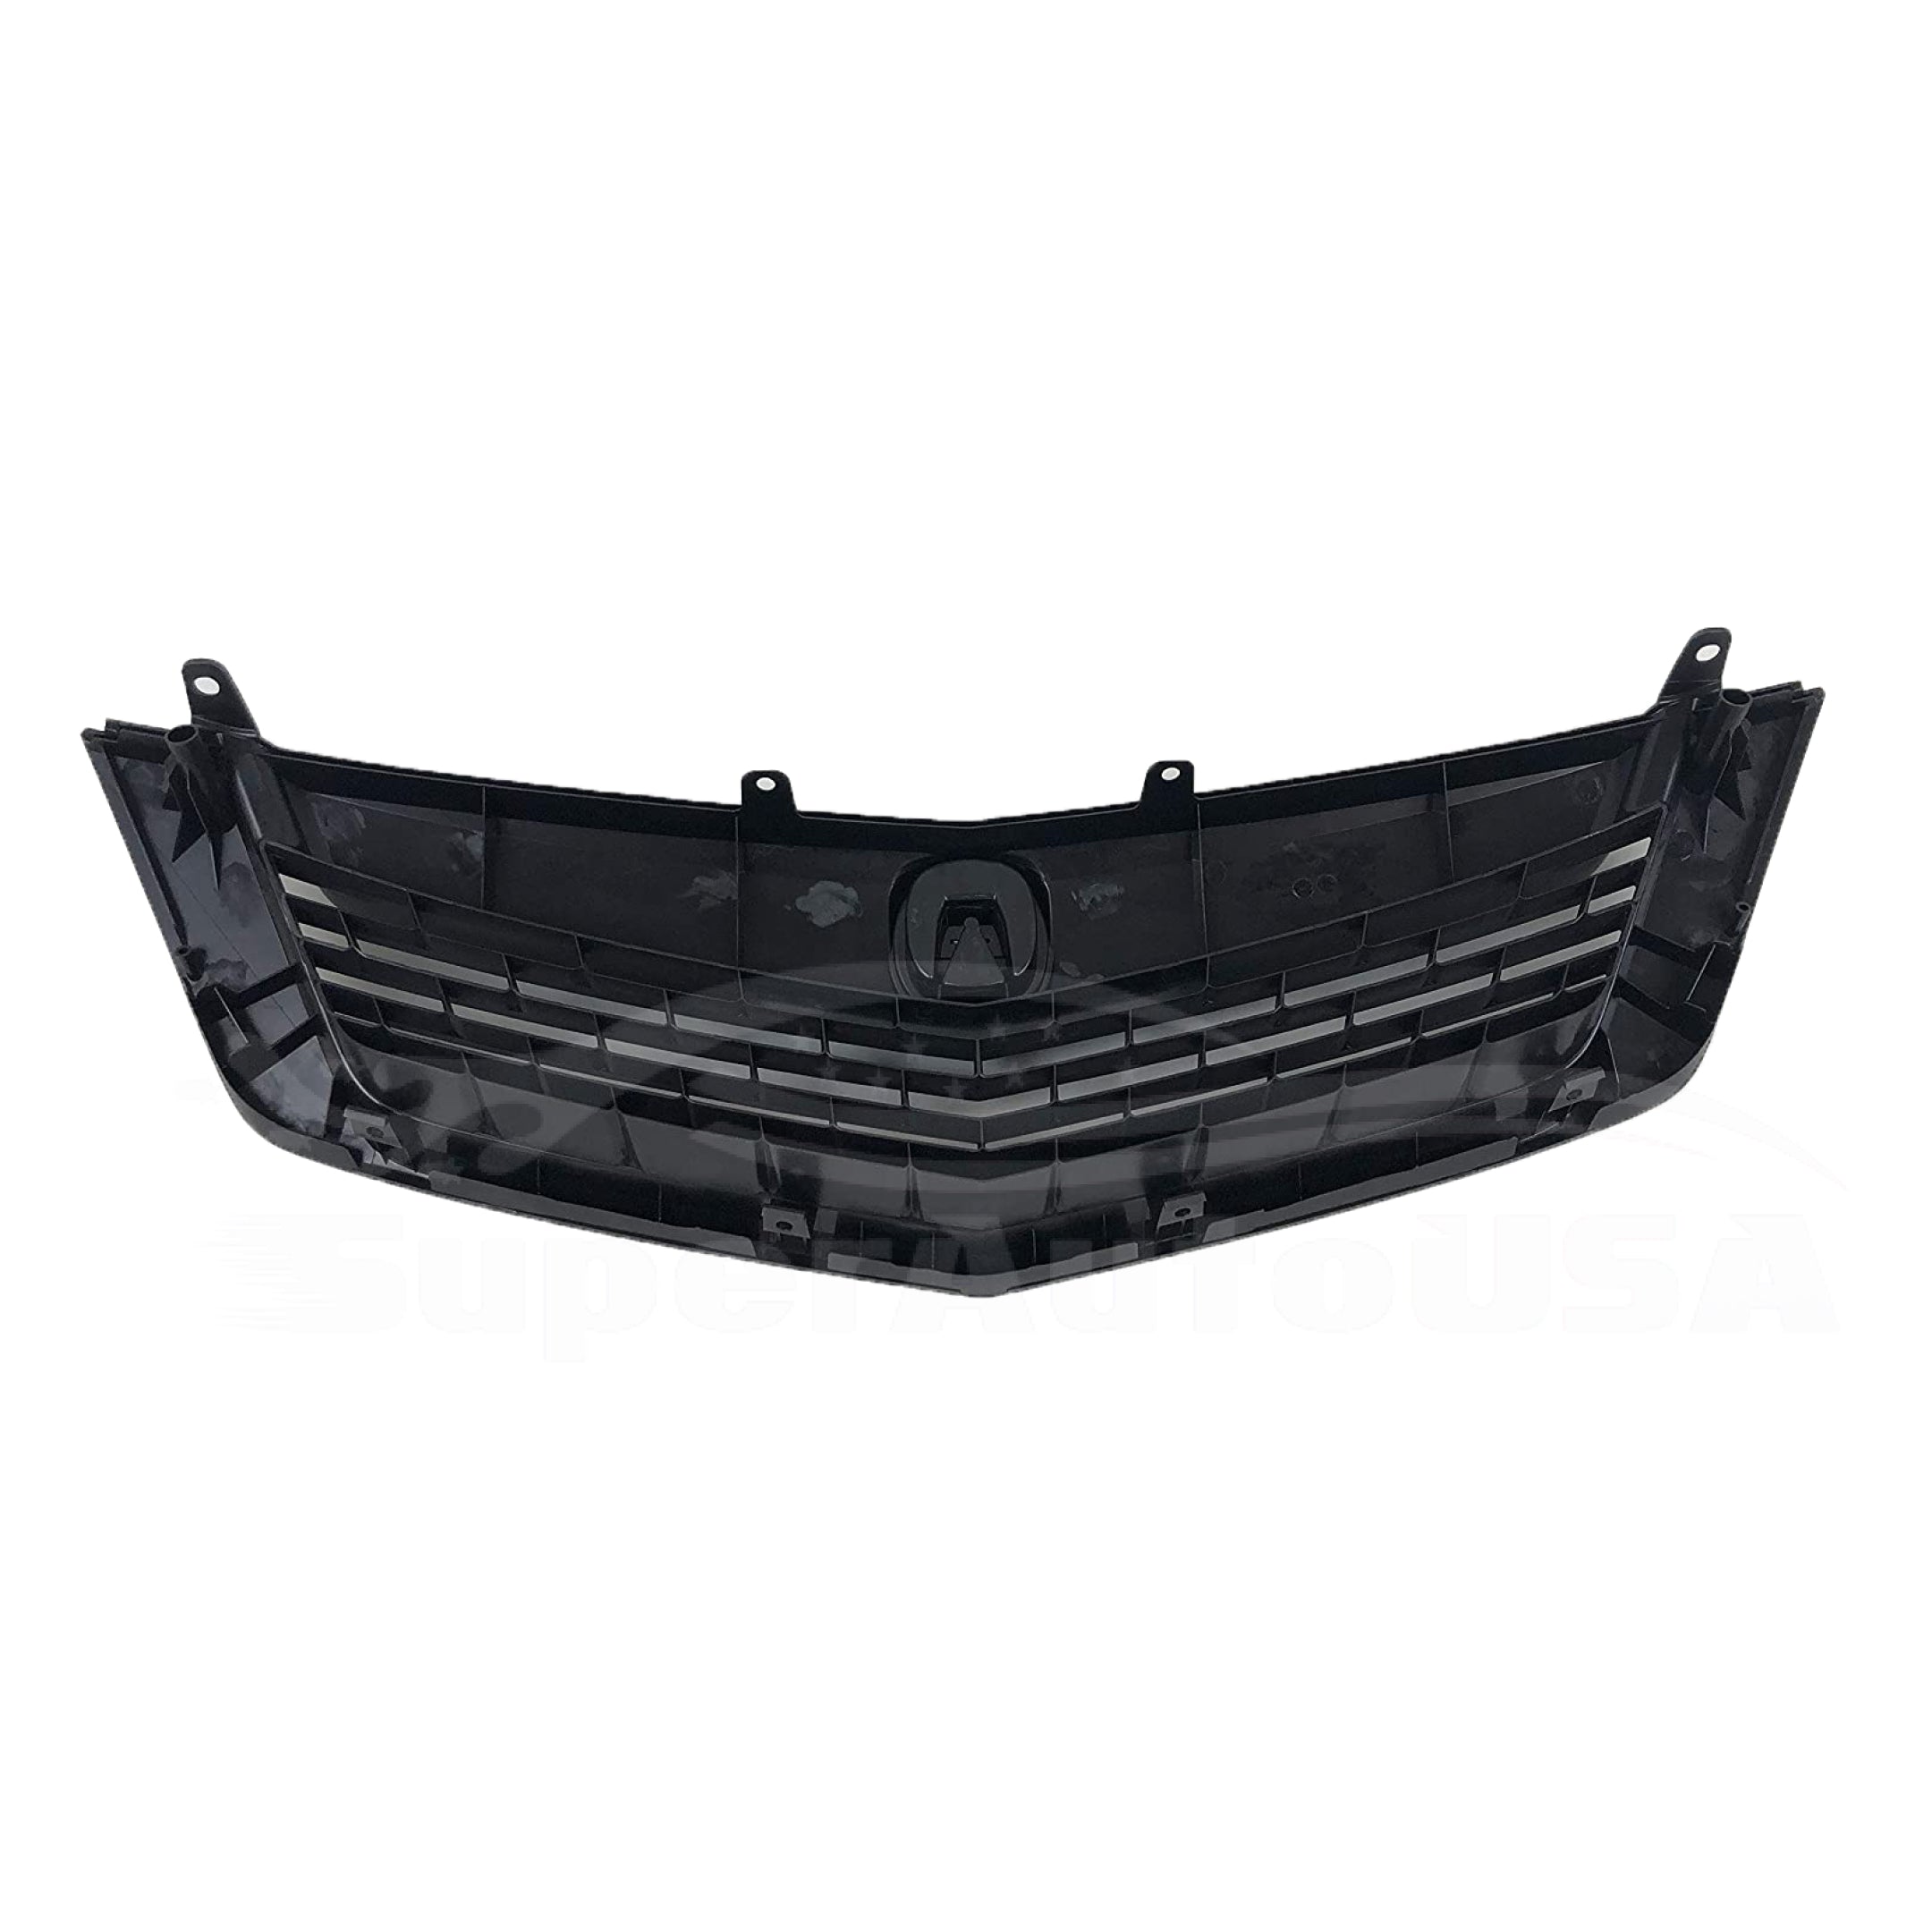 For 2009-2014 Acura TSX Front Bumper Upper Grille Assembly (Painted Matte Black) - 0